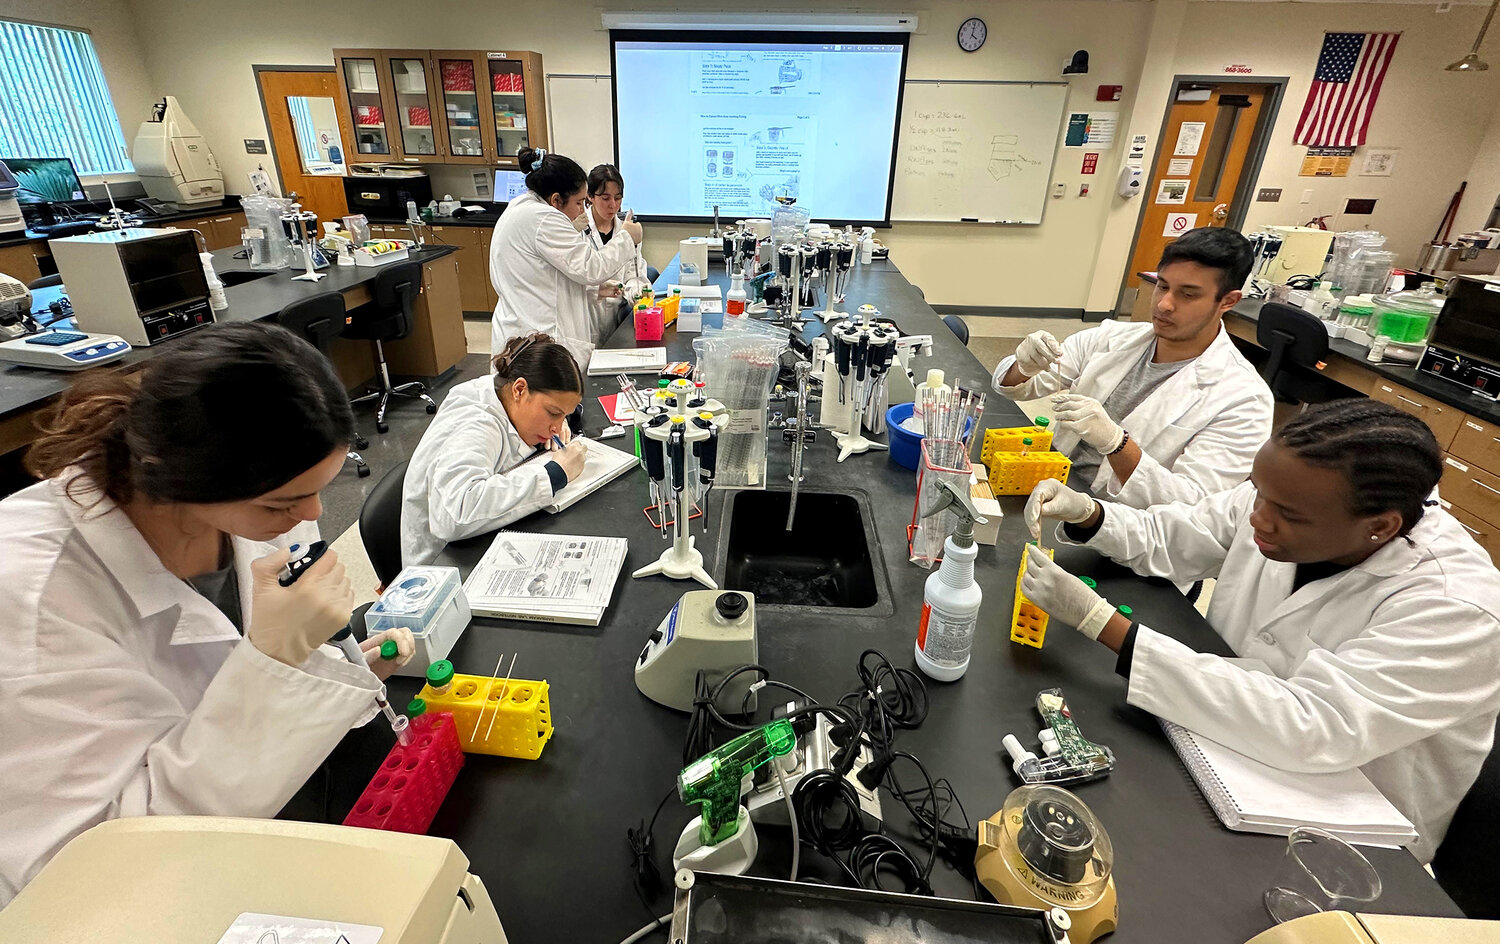 In Palm Beach State College’s biotechnology lab, students gain the high-demand skills needed in today’s bioscience industry.